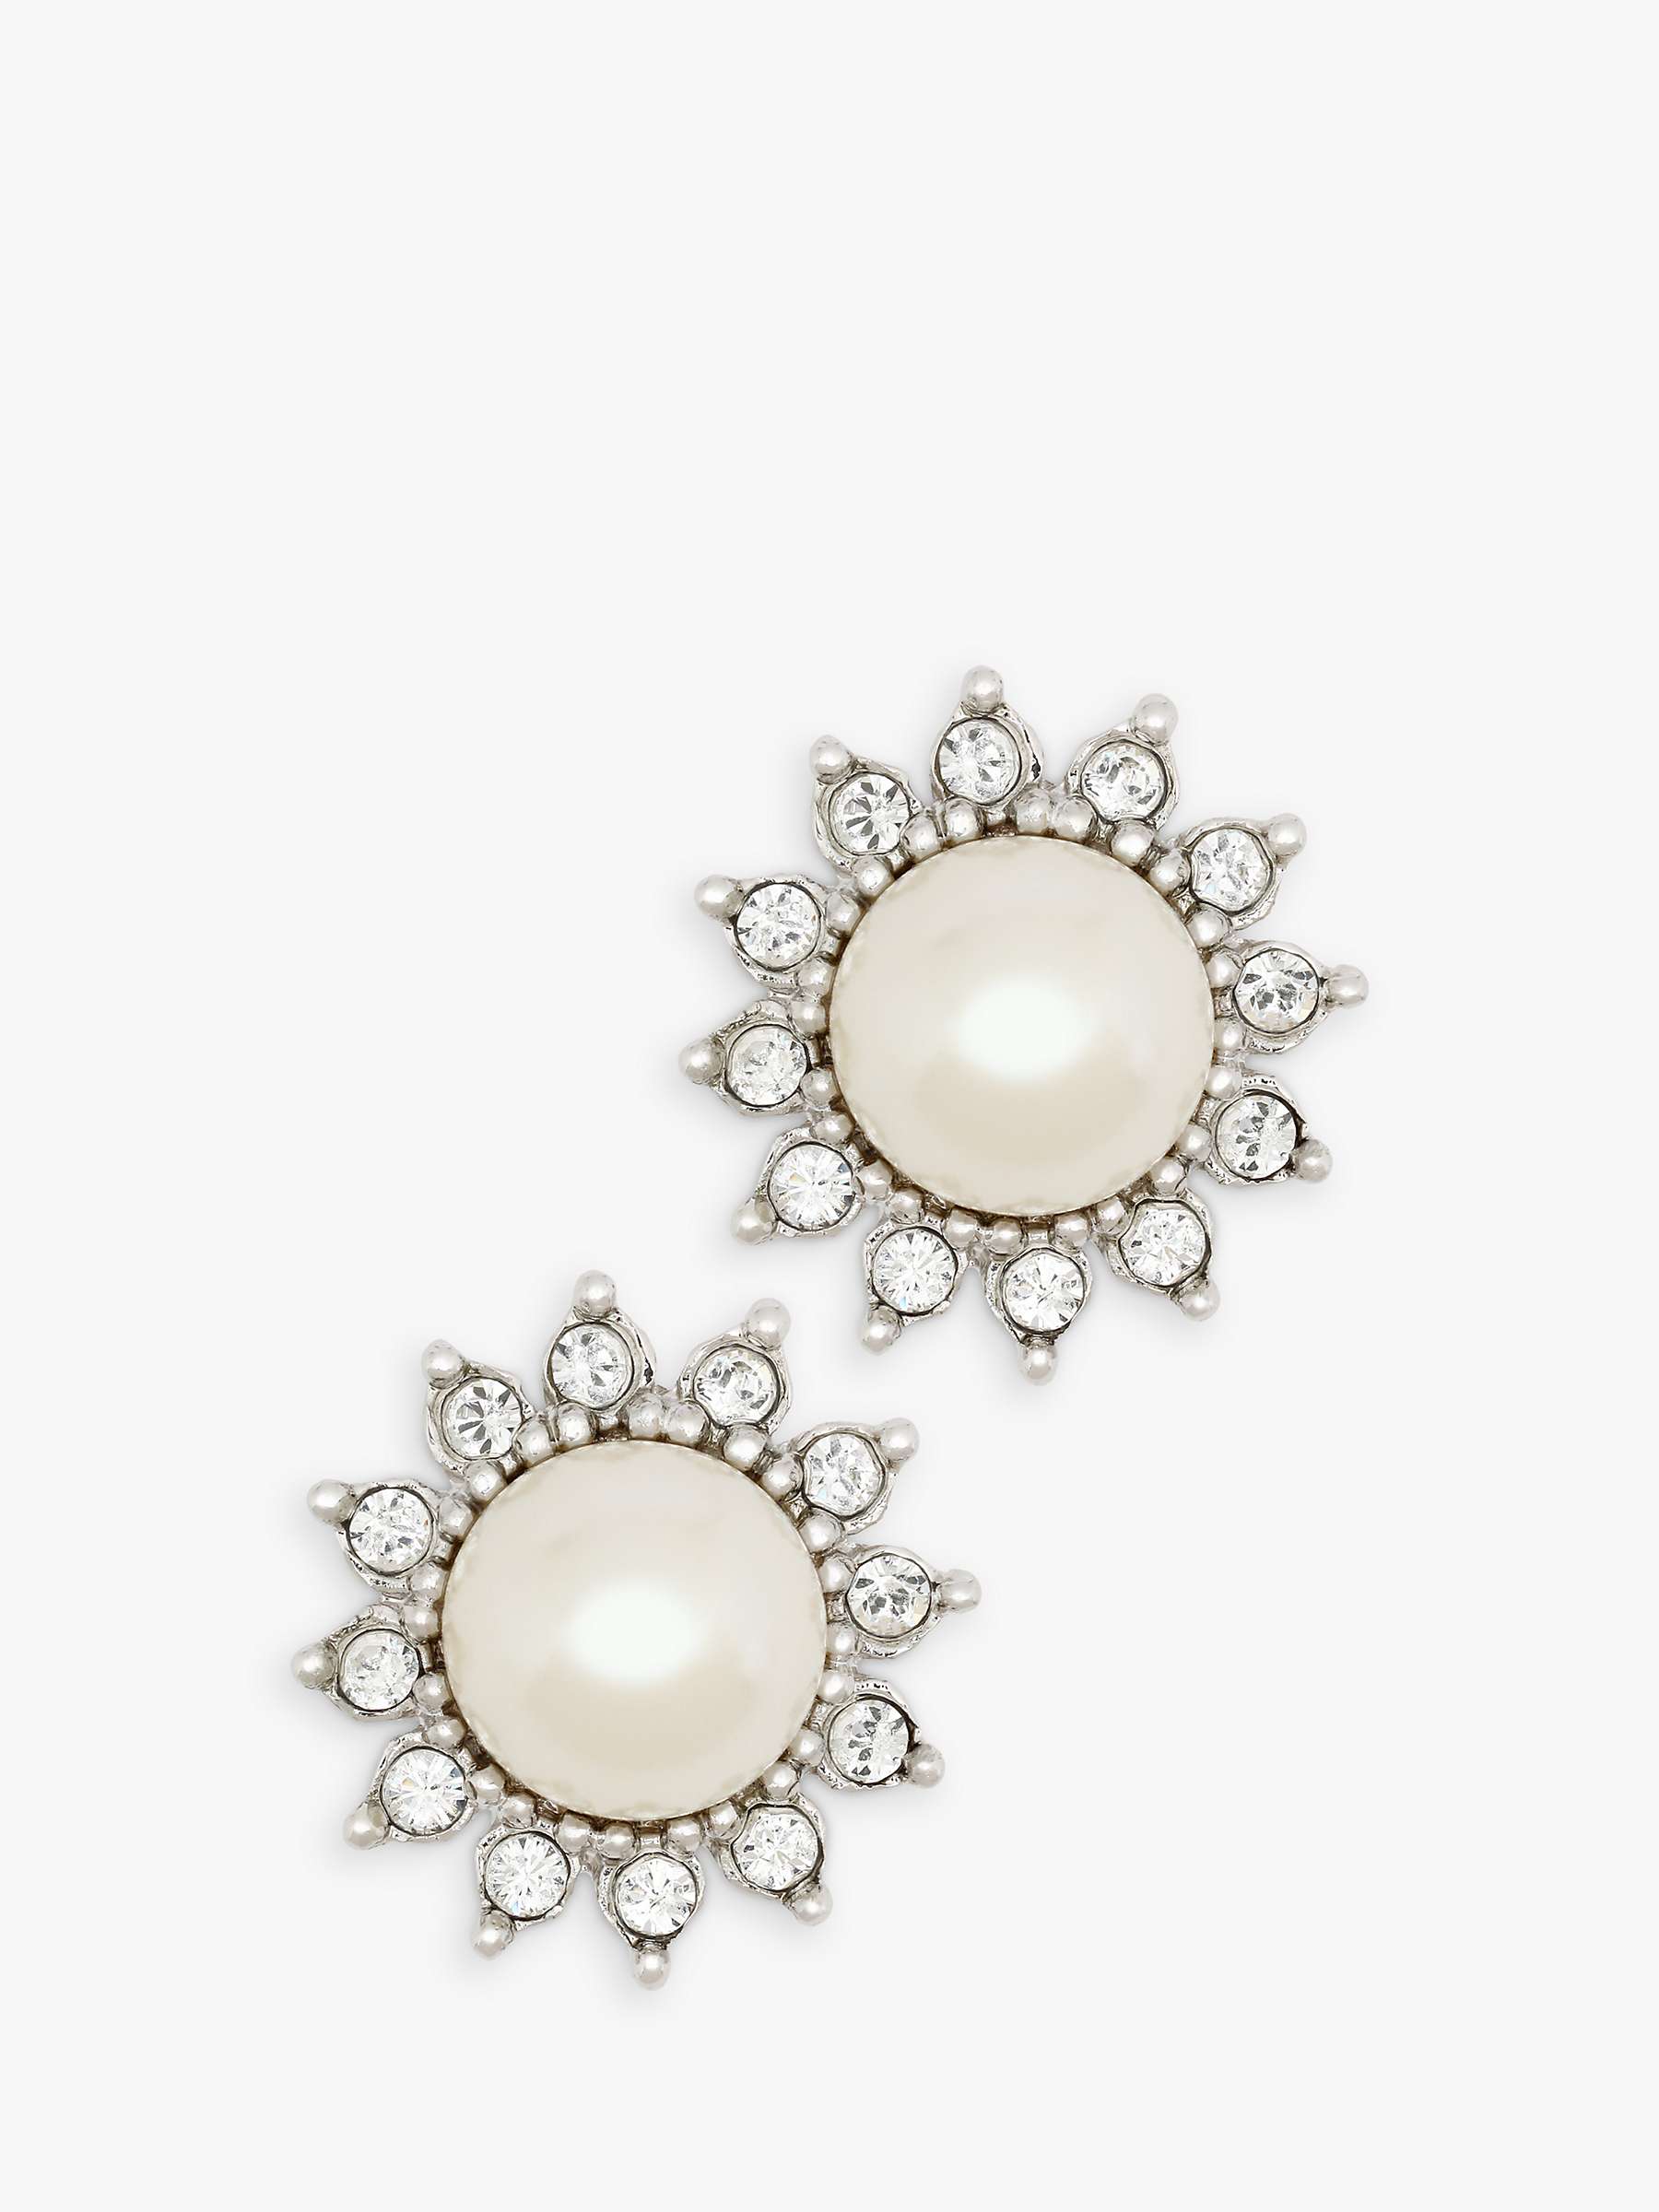 Buy Eclectica Vintage Rhodium Plated Faux Pearl Swarovski Crystal Daisy Clip-On Earrings, Dated Circa 1990s, Silver Online at johnlewis.com